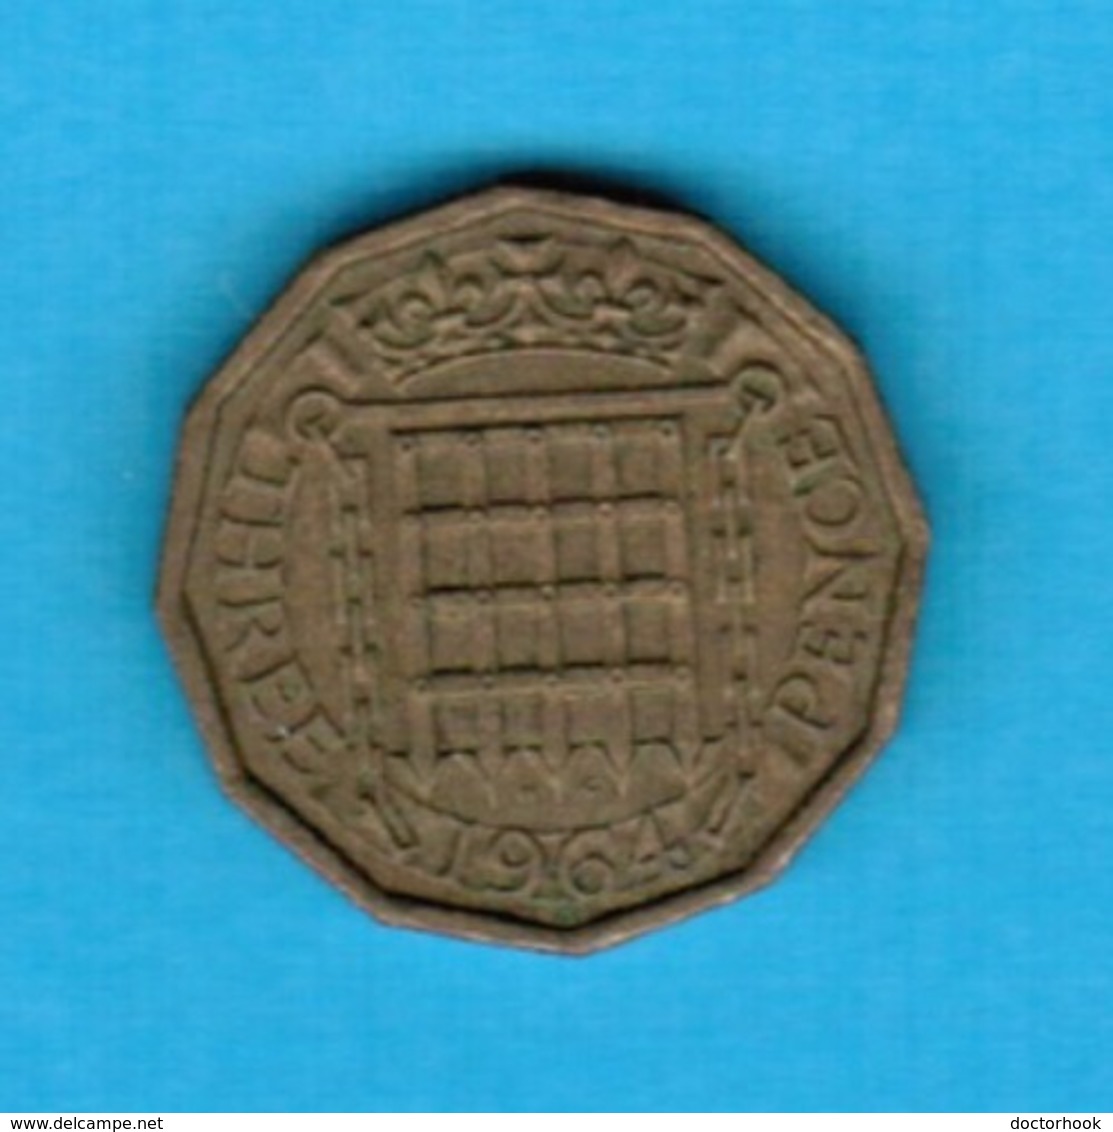 GREAT BRITAIN  3 PENCE 1964 (KM # 900) #5252 - F. 3 Pence